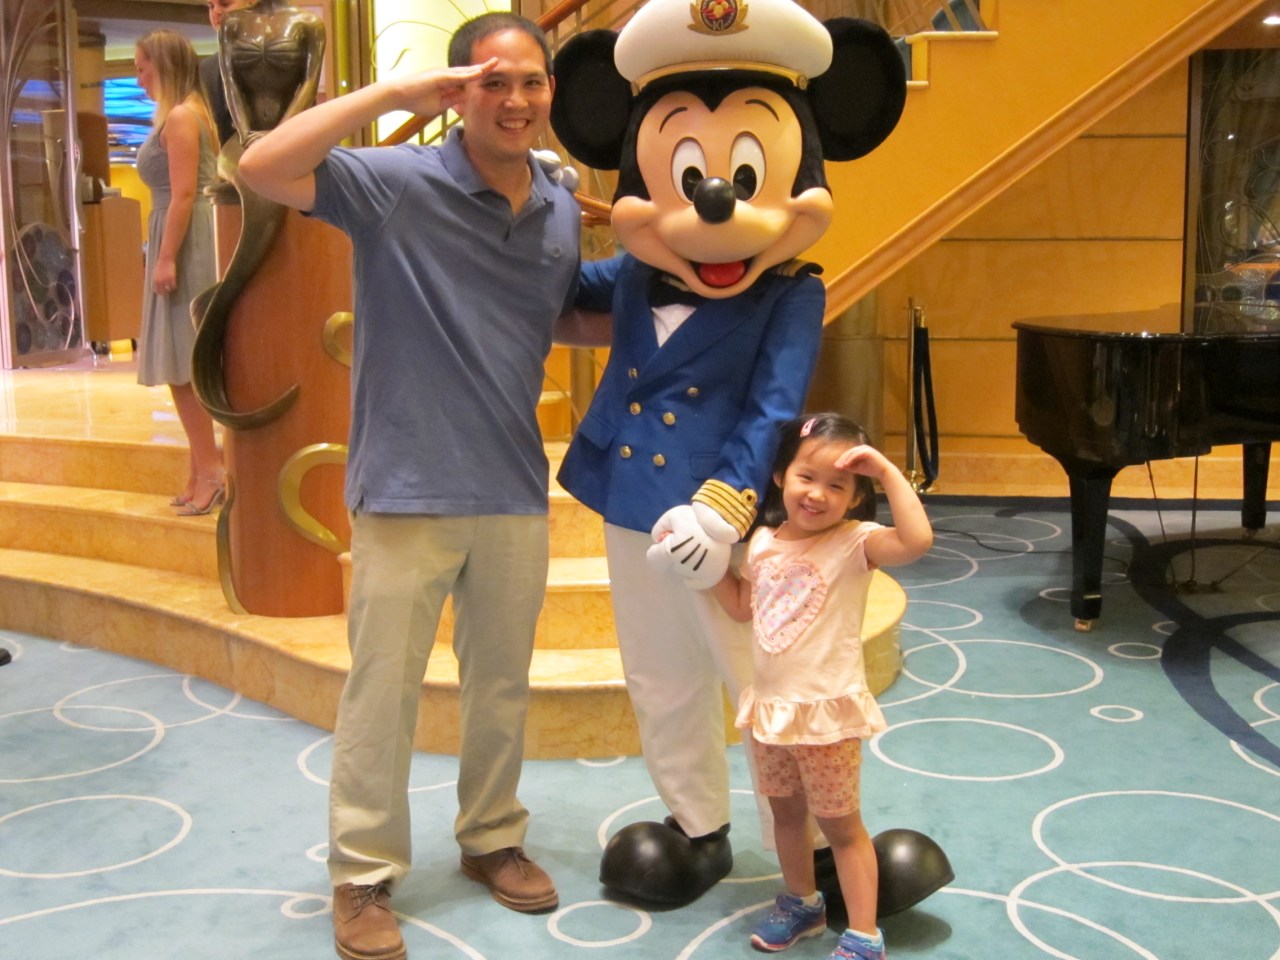 A man and a young girl are posing with a person dressed in a Mickey Mouse costume wearing a captain's uniform. They are all making a saluting gesture. The background includes a staircase, a piano, and a statue. The setting appears to be indoors, possibly in a themed venue or on a cruise ship.